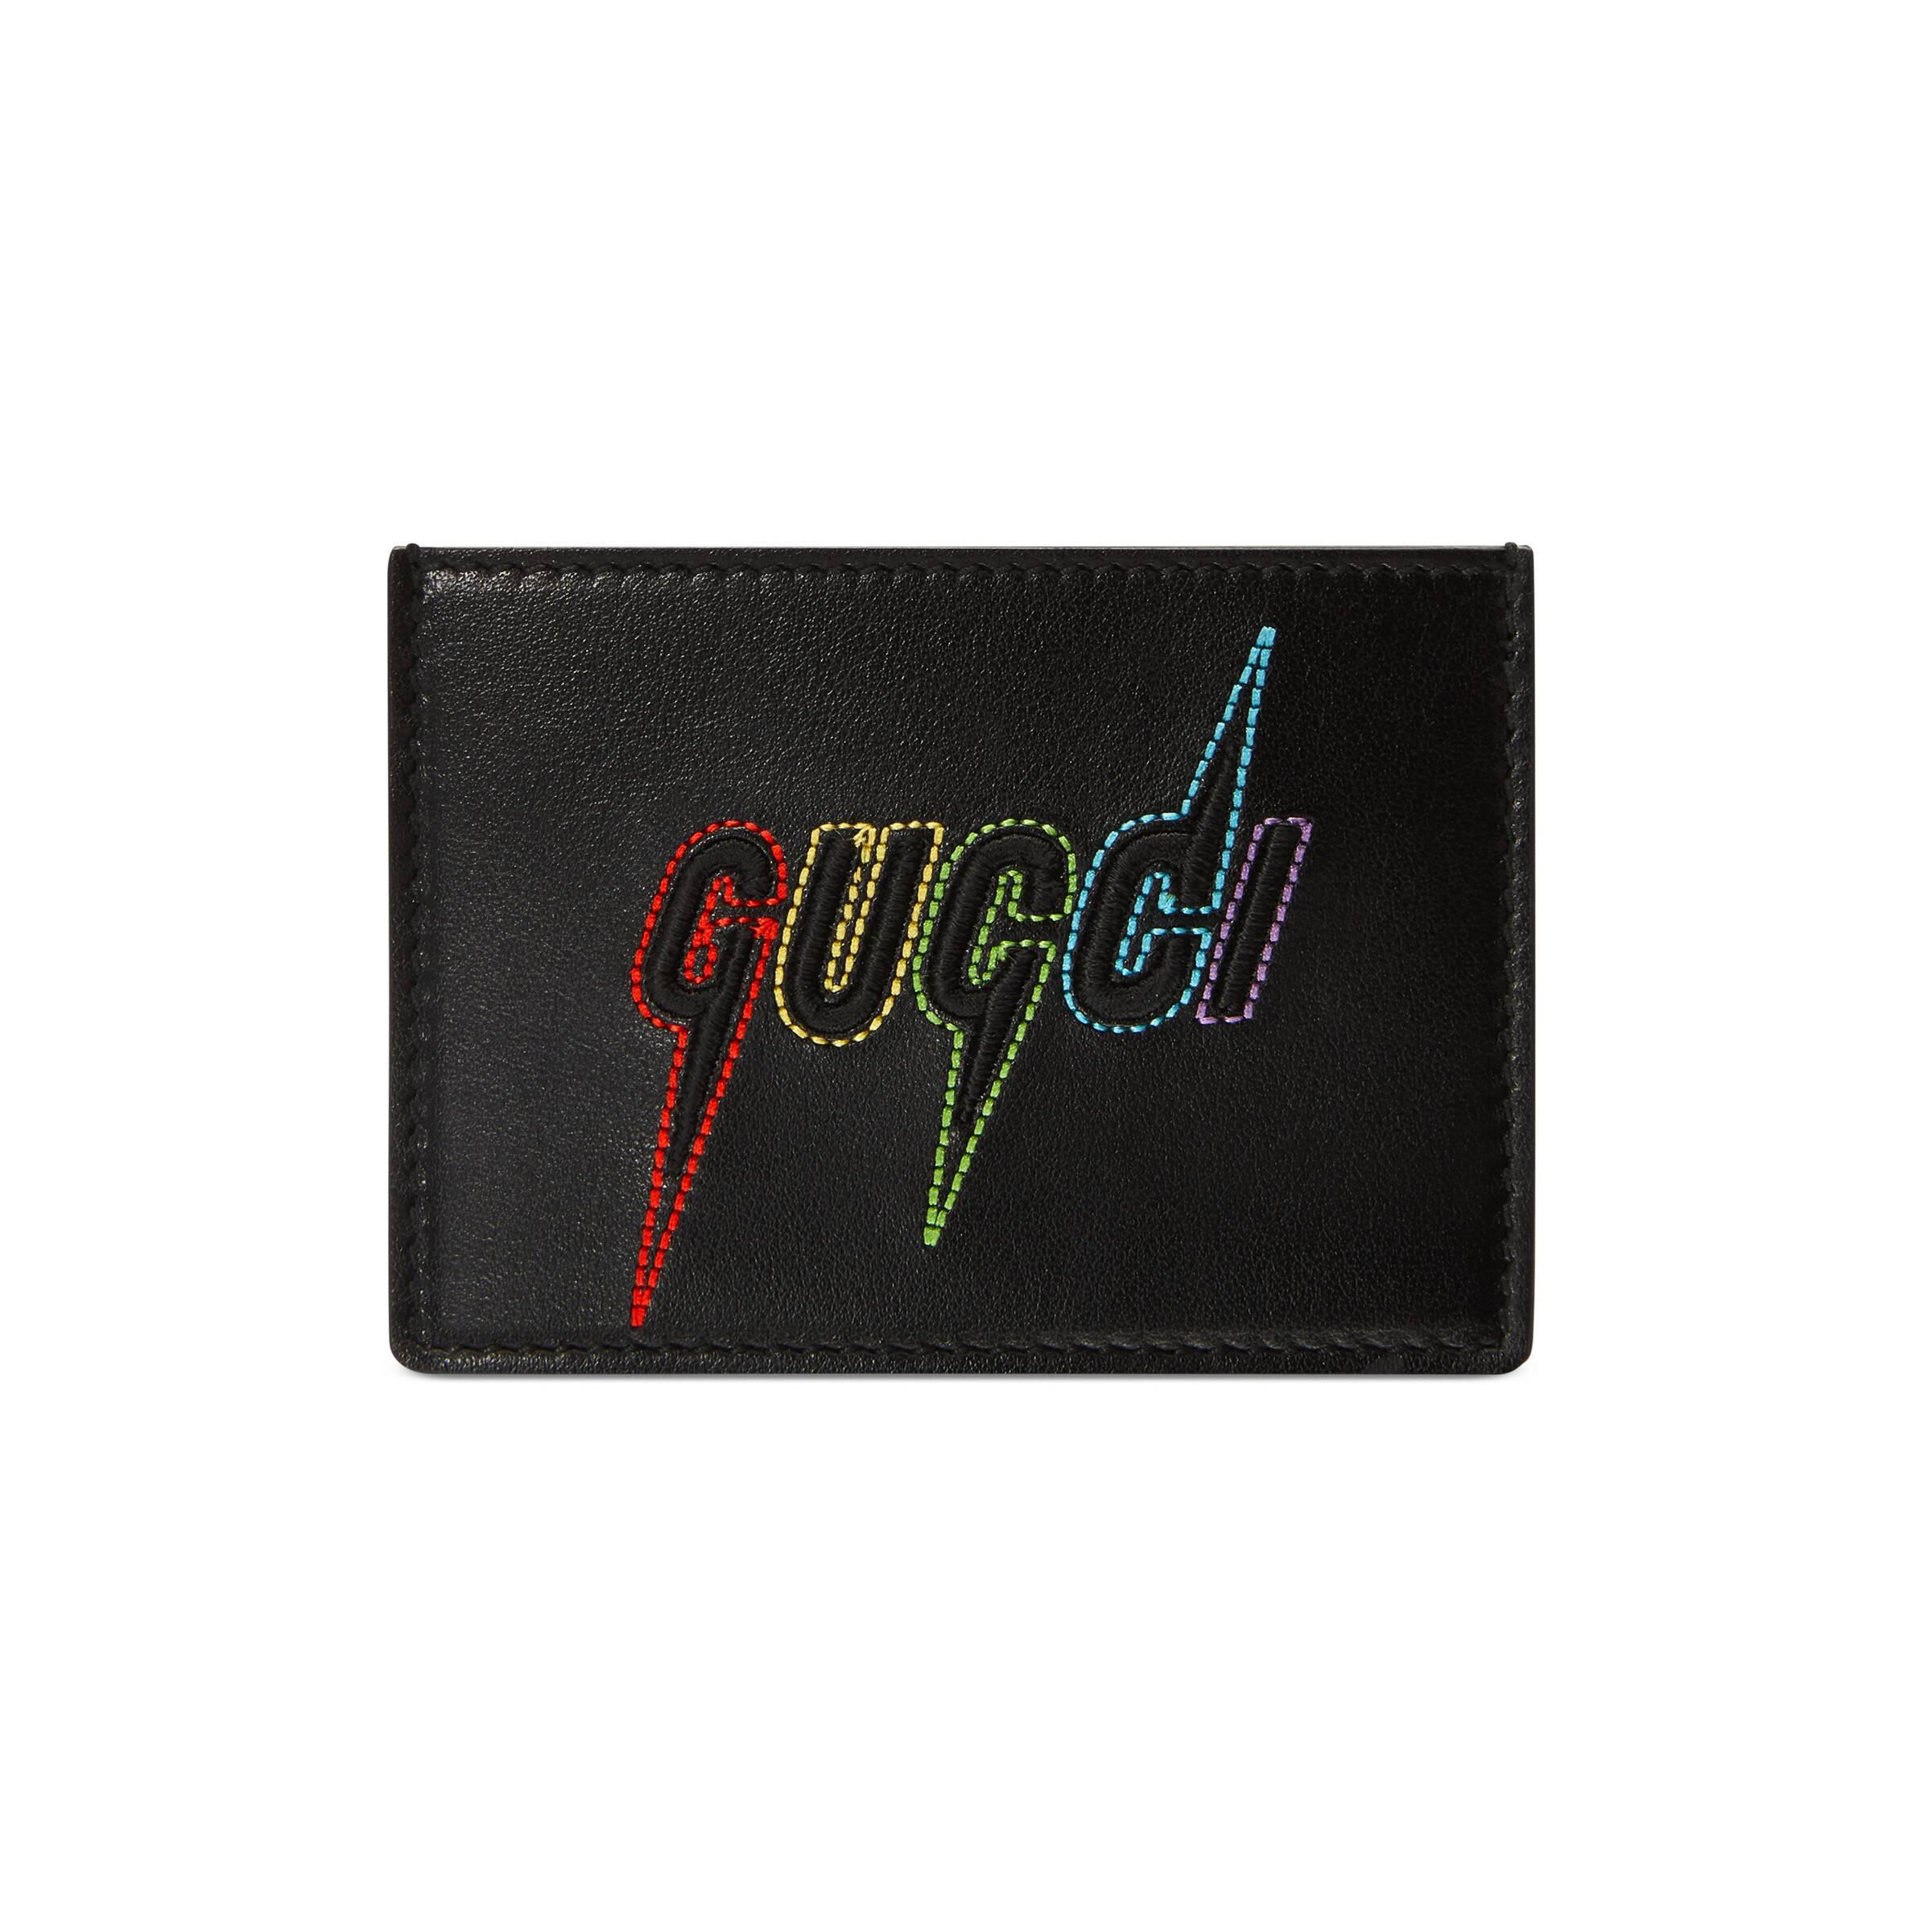 Gucci Leather Blade Bifold Wallet in Black for Men - Save 36% - Lyst